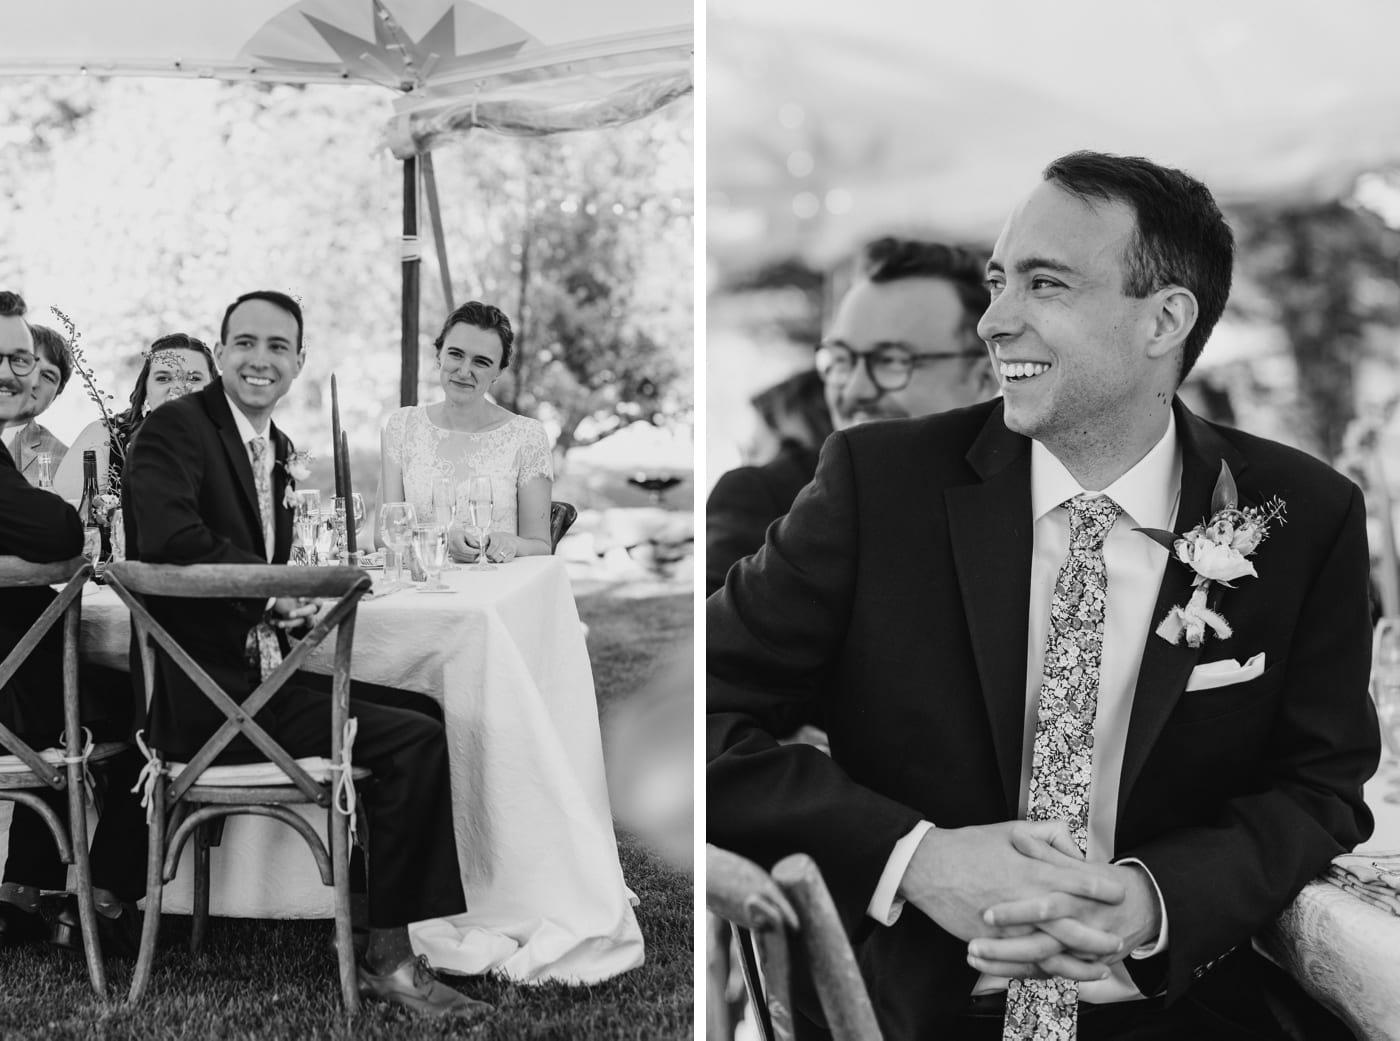 A colorful outdoor wedding in a backyard in Batavia NY